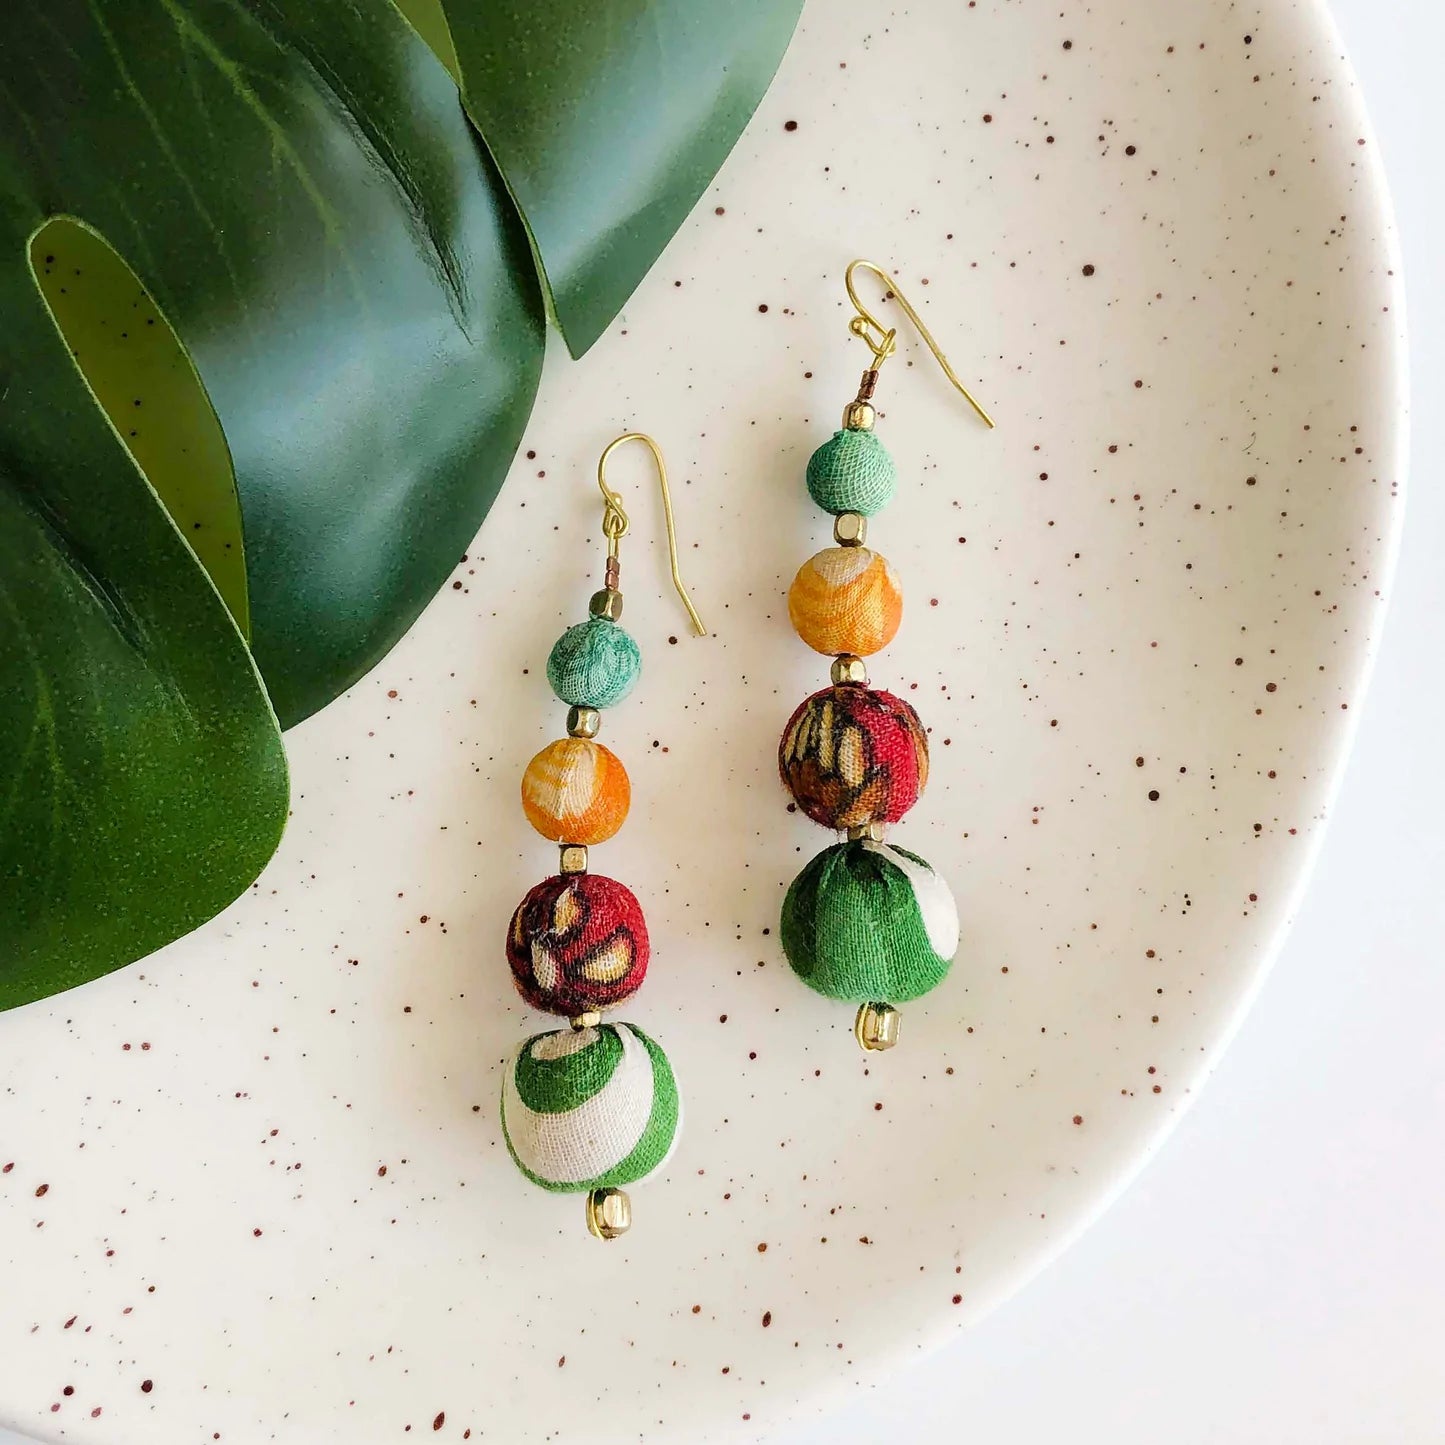 Graduated Kantha Earrings at Lucia's World Emporium